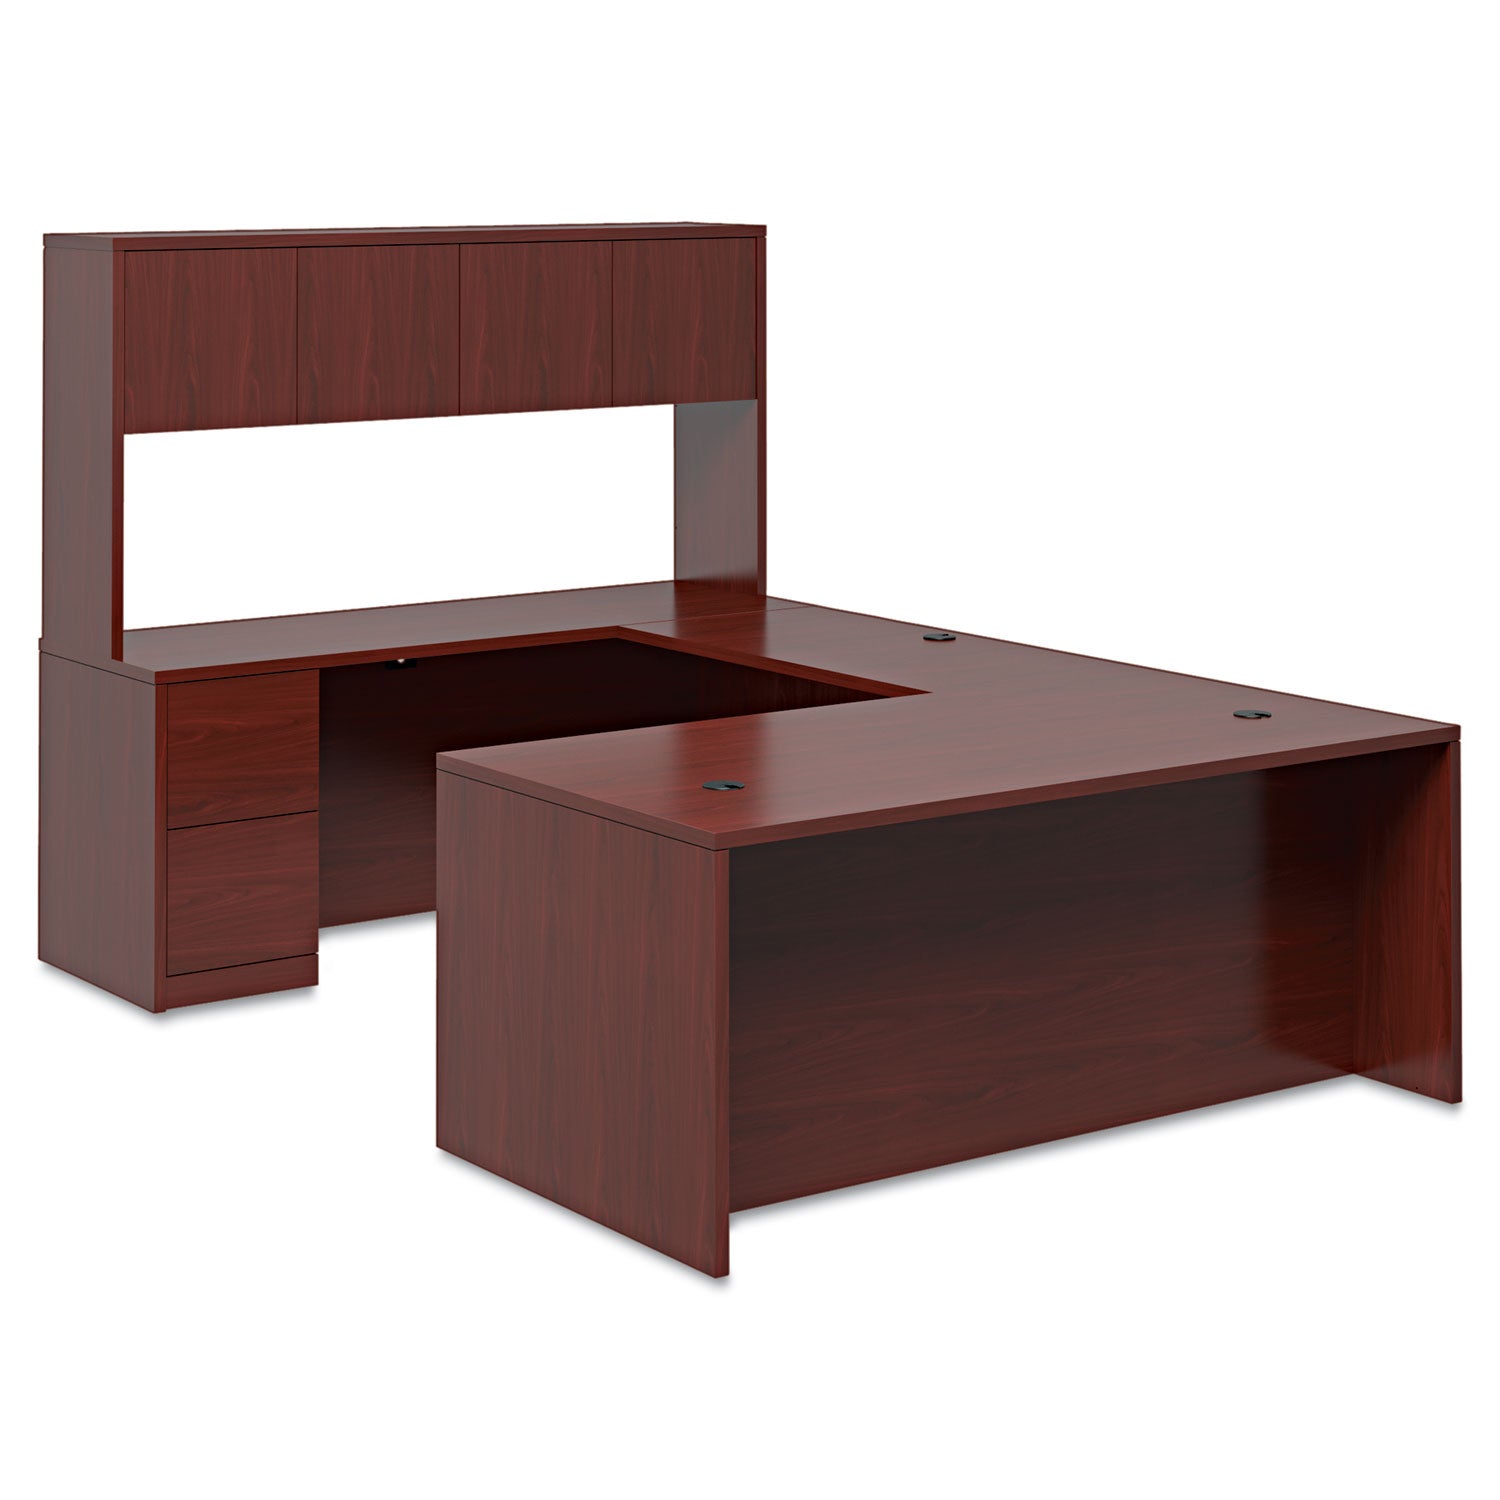 10500 Series "L" Workstation Right Pedestal Desk with Full-Height Pedestal, 72" x 36" x 29.5", Mahogany - 